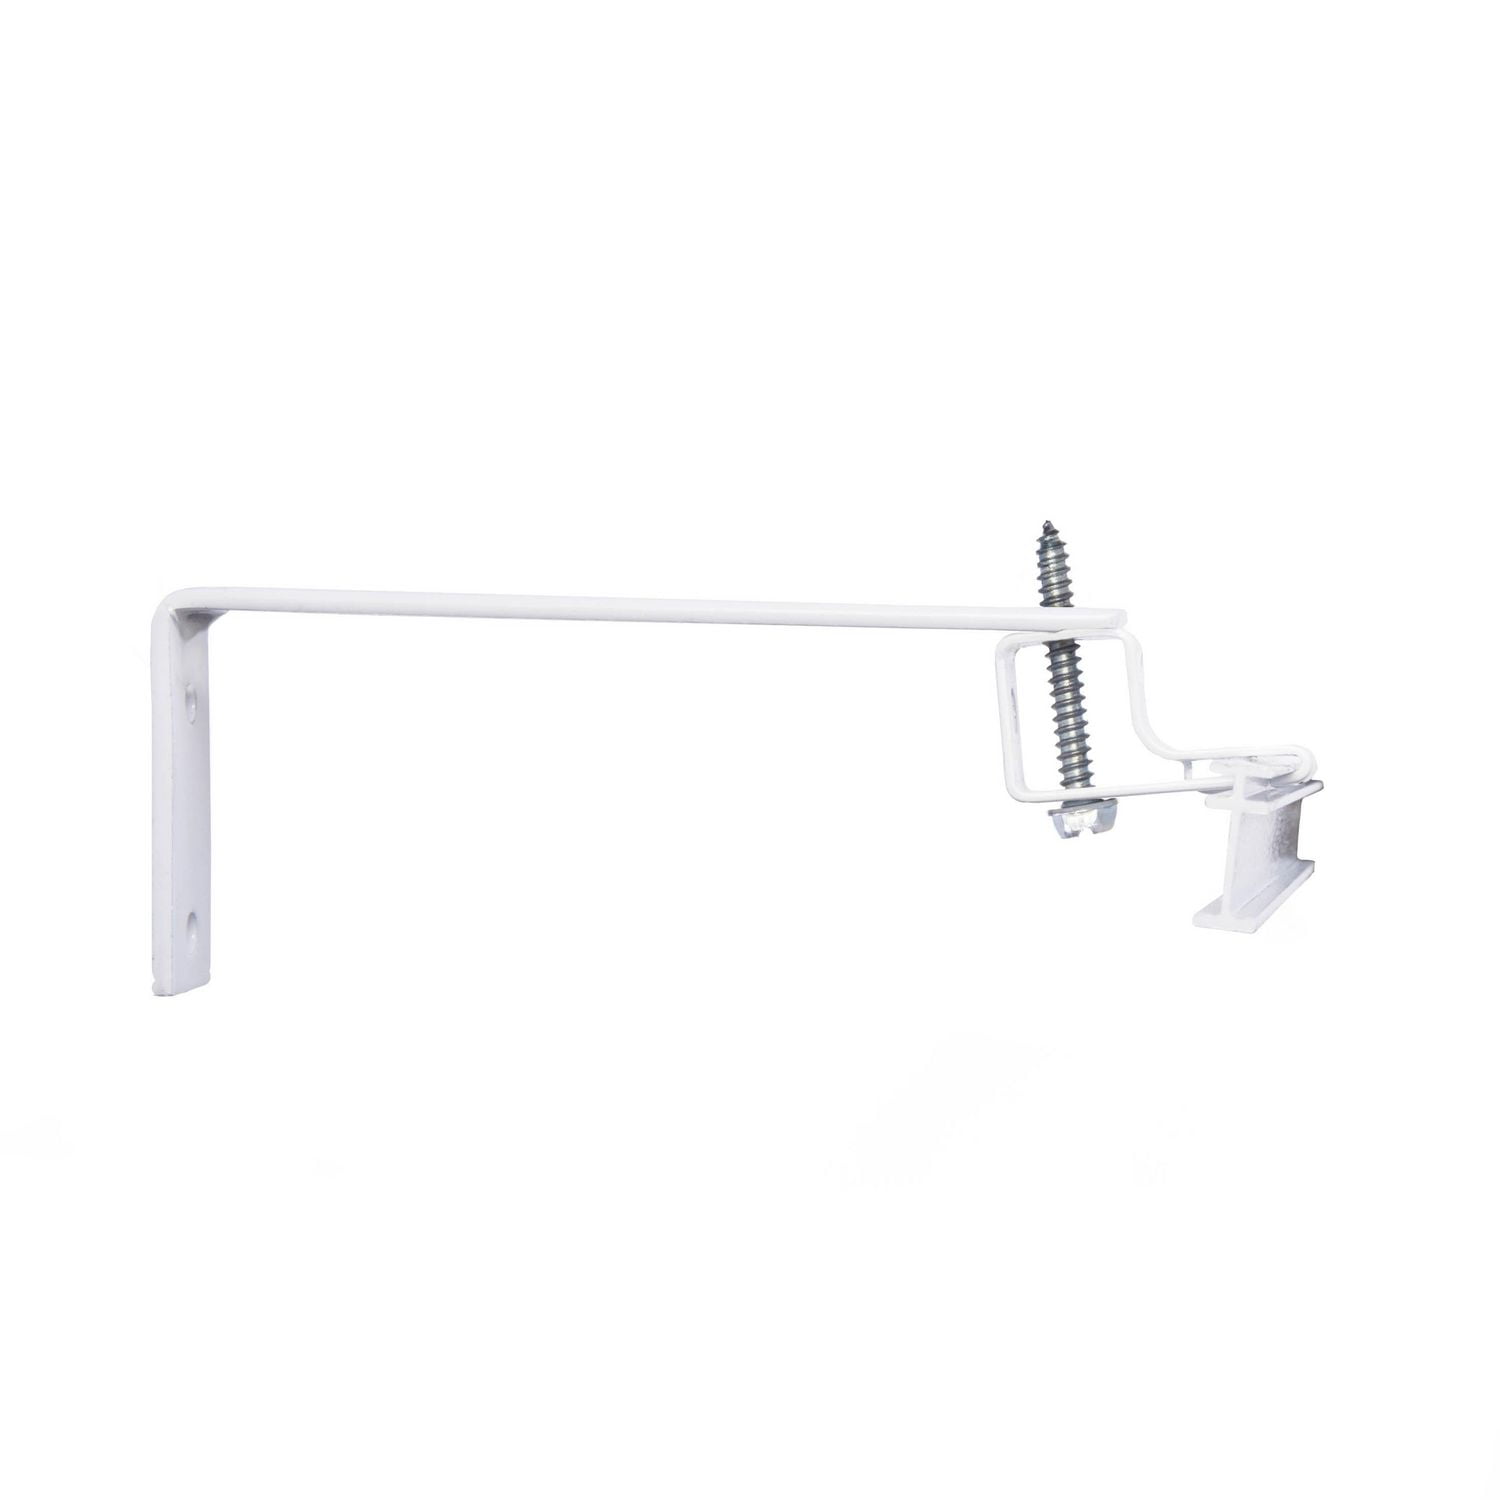 Shower Curtain Rod Brackets Curtain Rod Brackets Window Holders Self  Adhesive Holder Hooks Wall Fixing Clips For Rods From Xiaochunya, $12.97